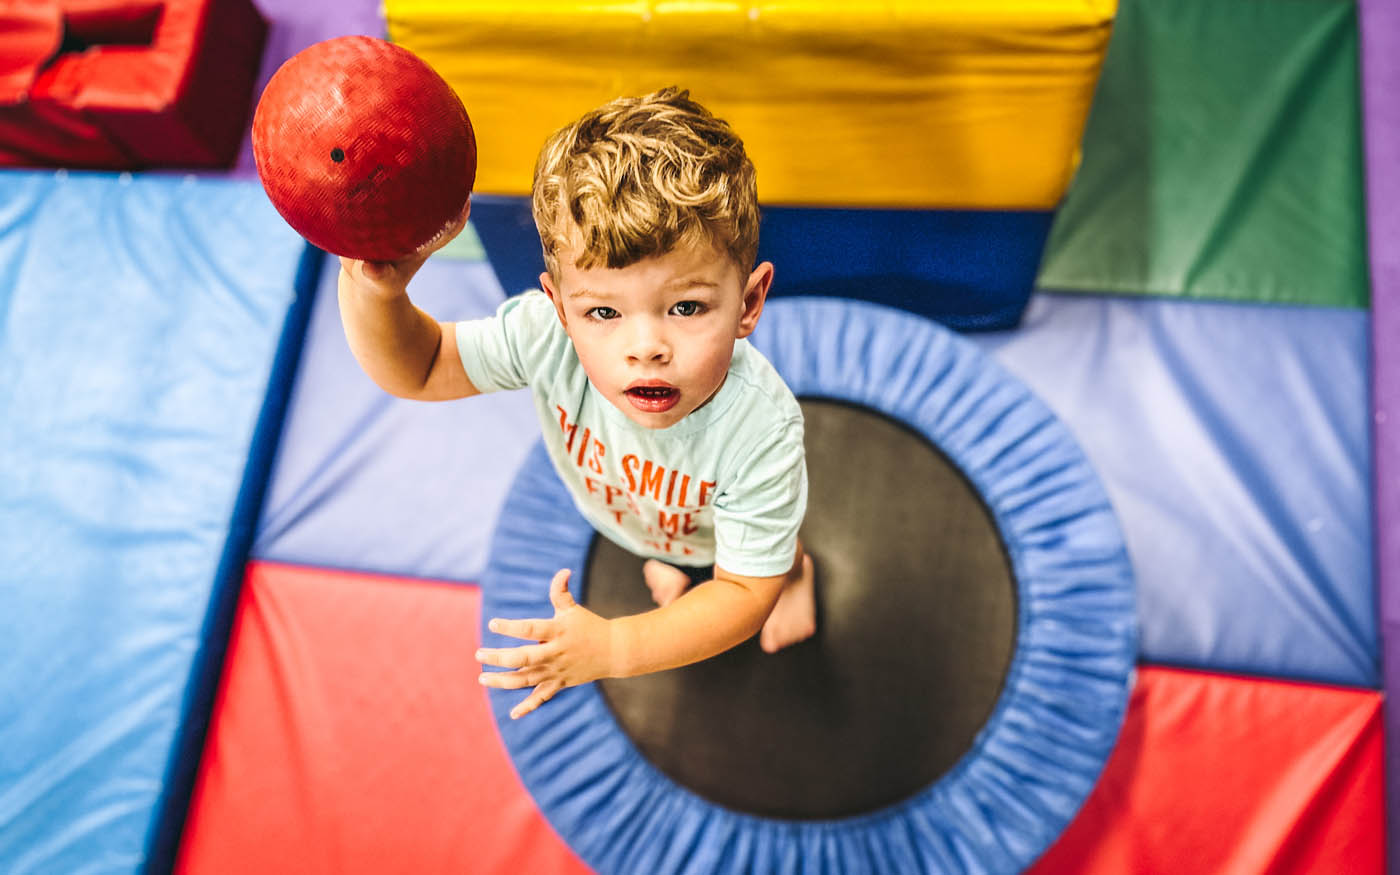 A toddler jumping on a Romp n' Roll tramp, learn more about our kids activities in Midlothian, VA.